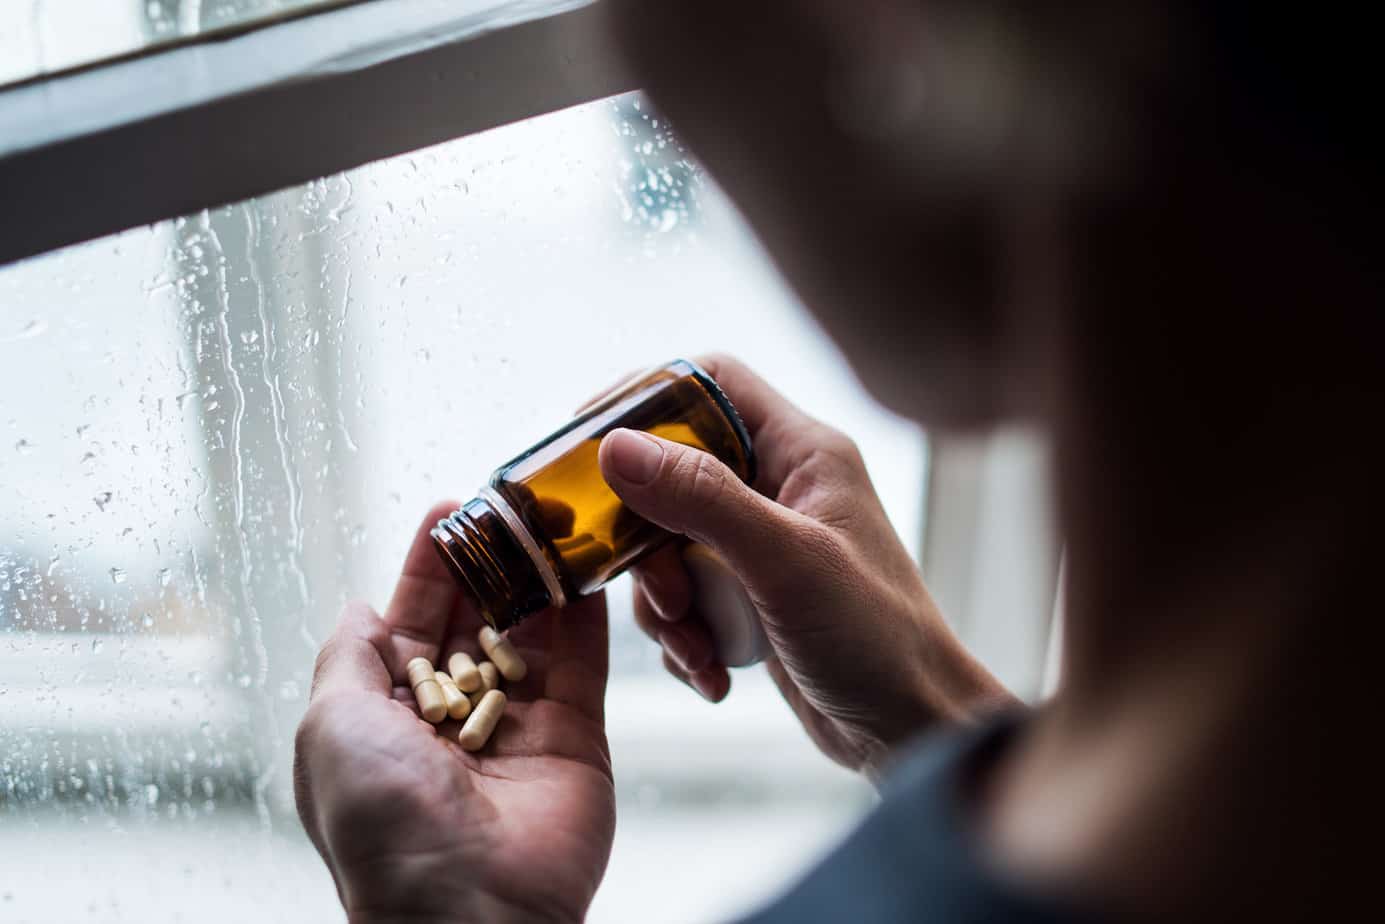 woman pouring many pills from a bottle into her palm